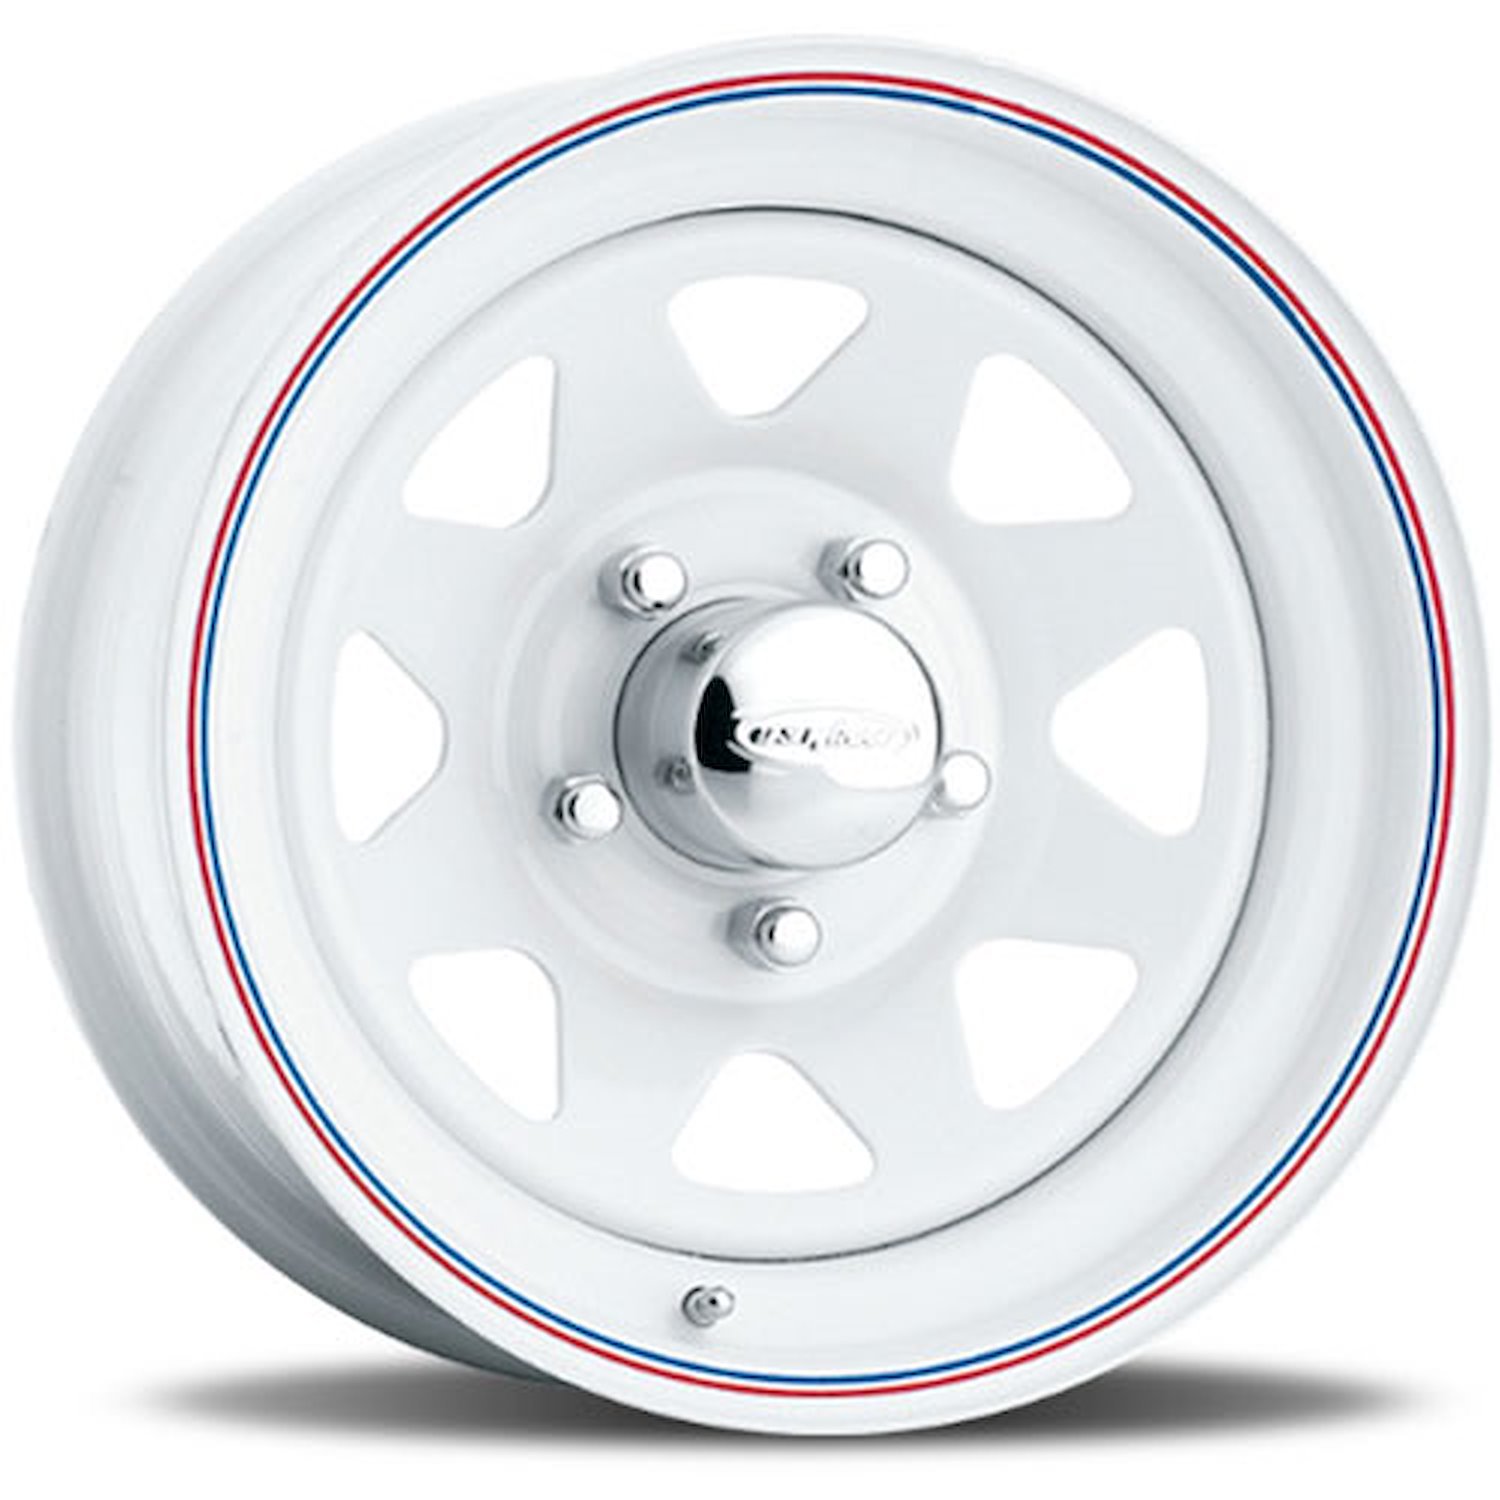 WHITE 8SPOKE 15 x 7 5 x 5 Bolt Circle 375 Back Spacing 6 offset 33 Center Bore 1600 lbs Load Rating